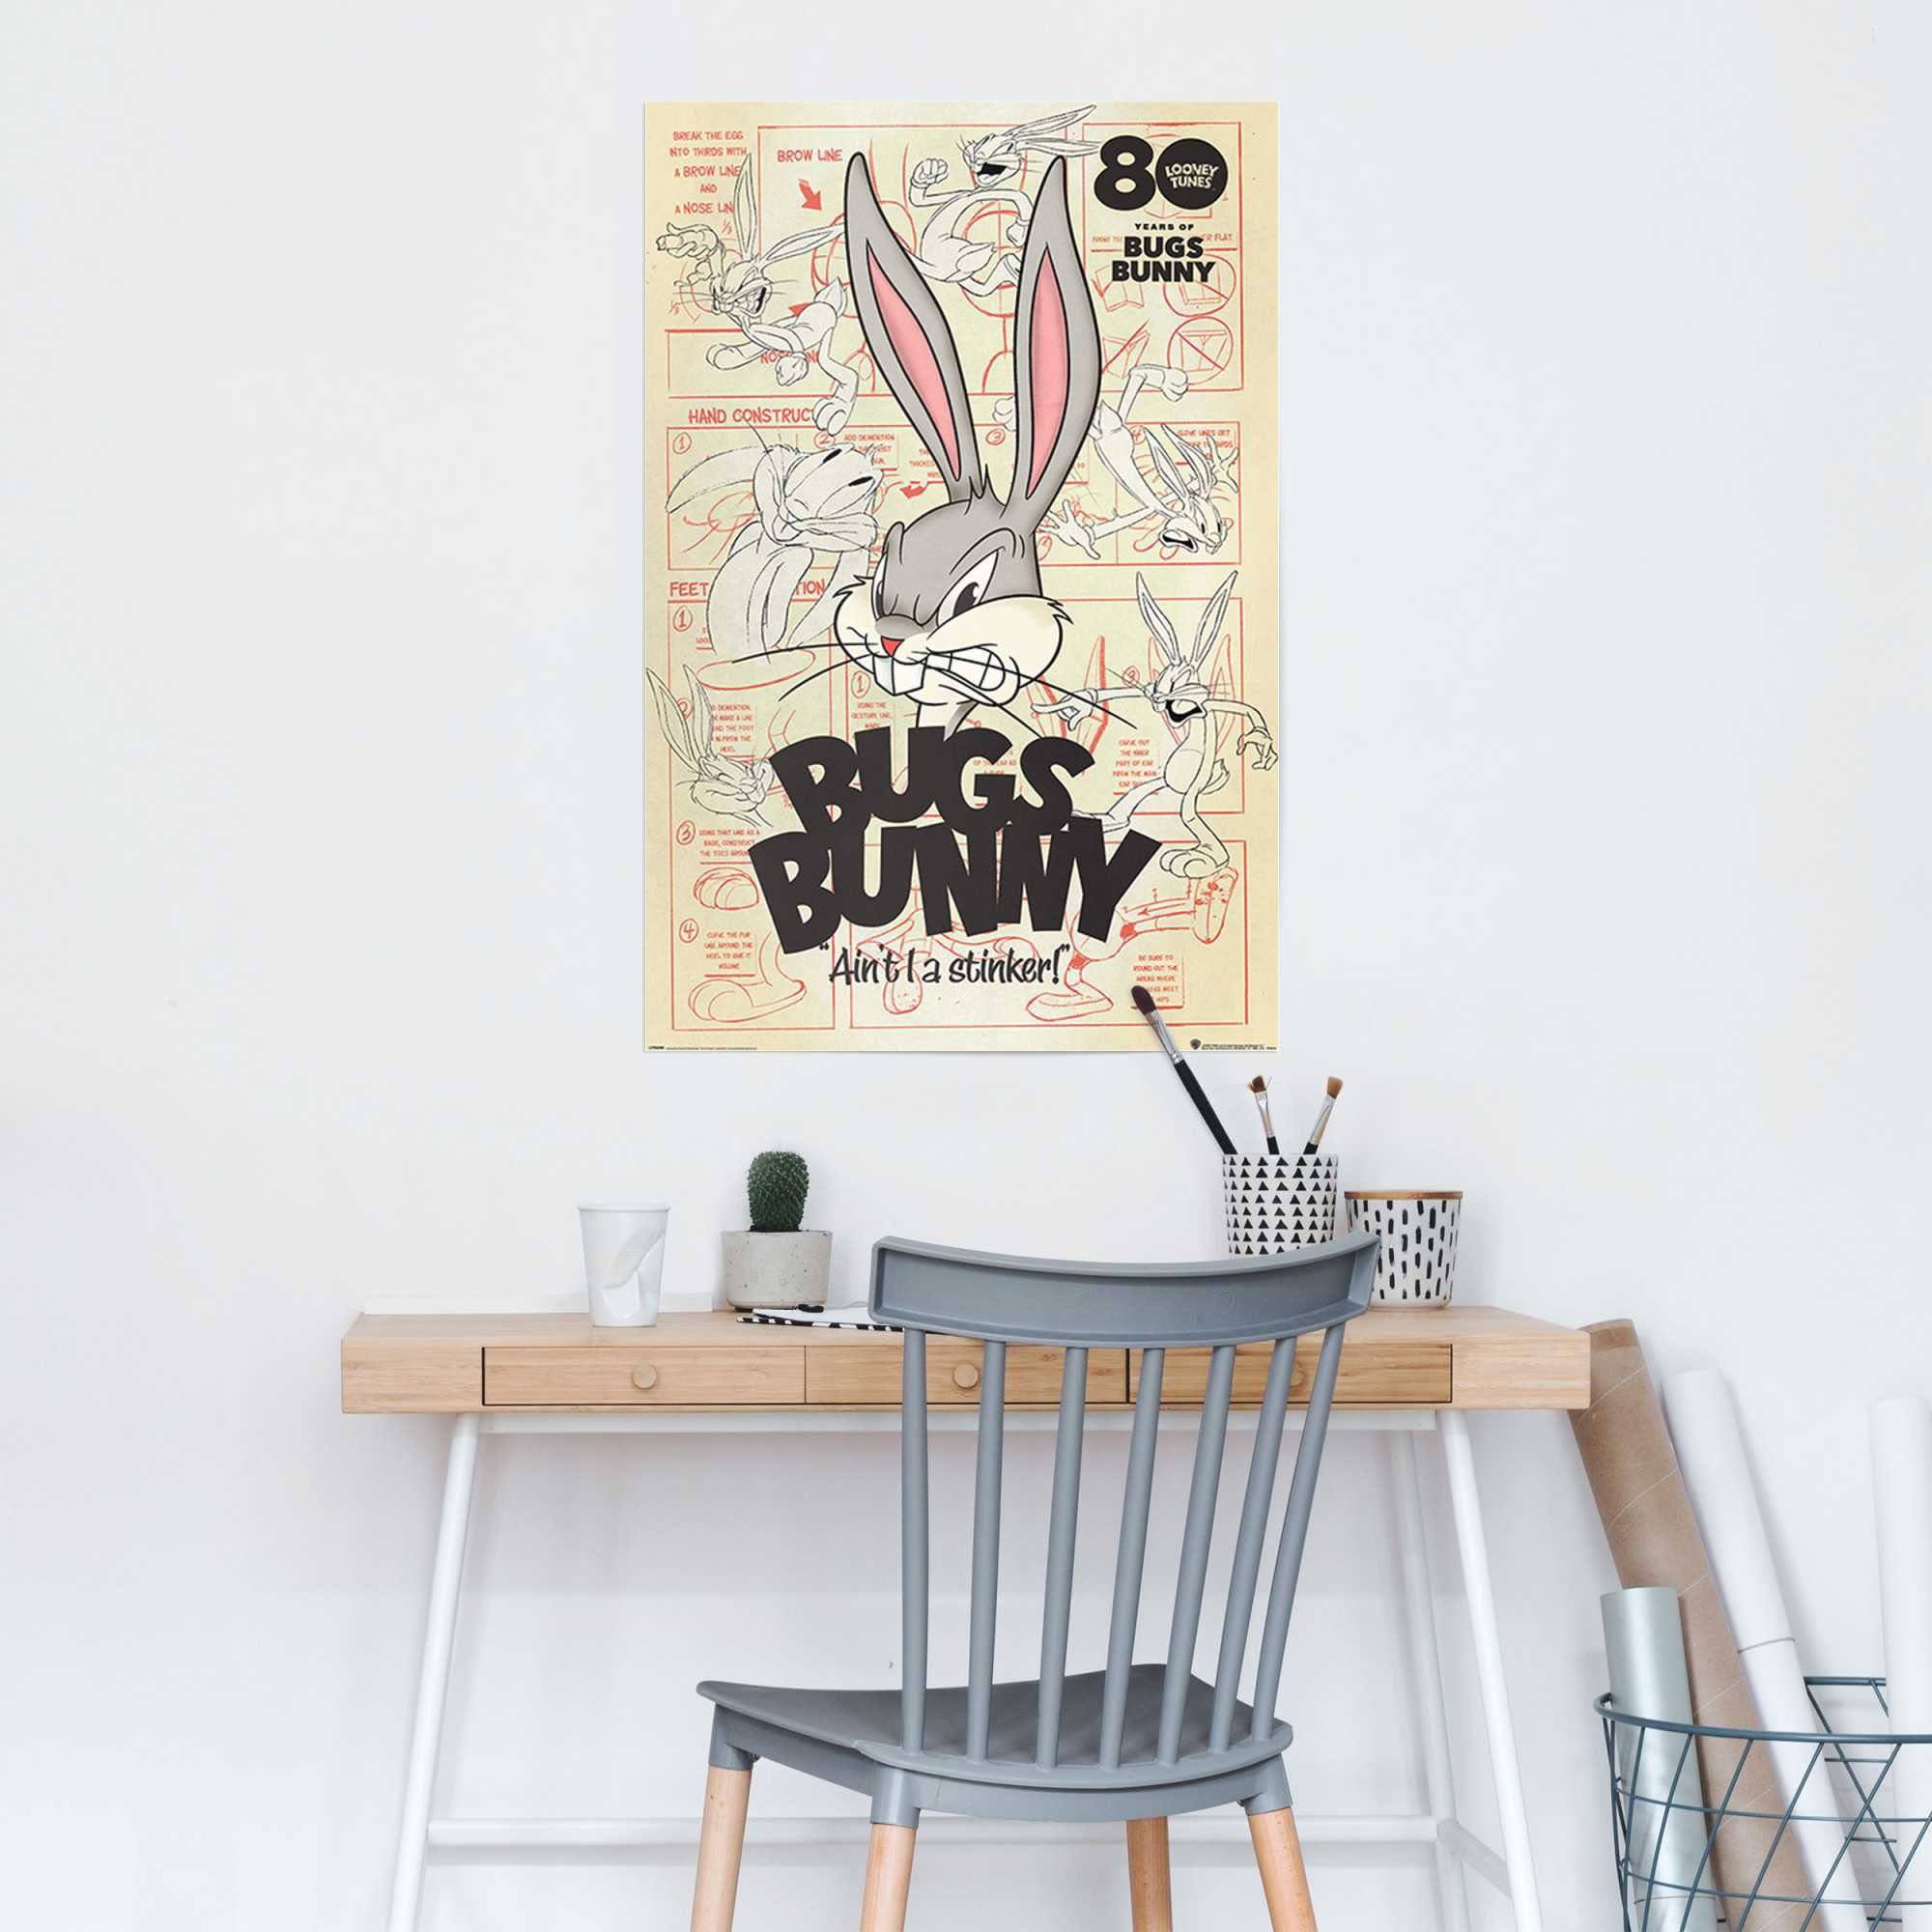 Reinders! Poster Bugs Bros - - Bunny Looney (1 St) Tunes a Hase, I ait stinker Warner